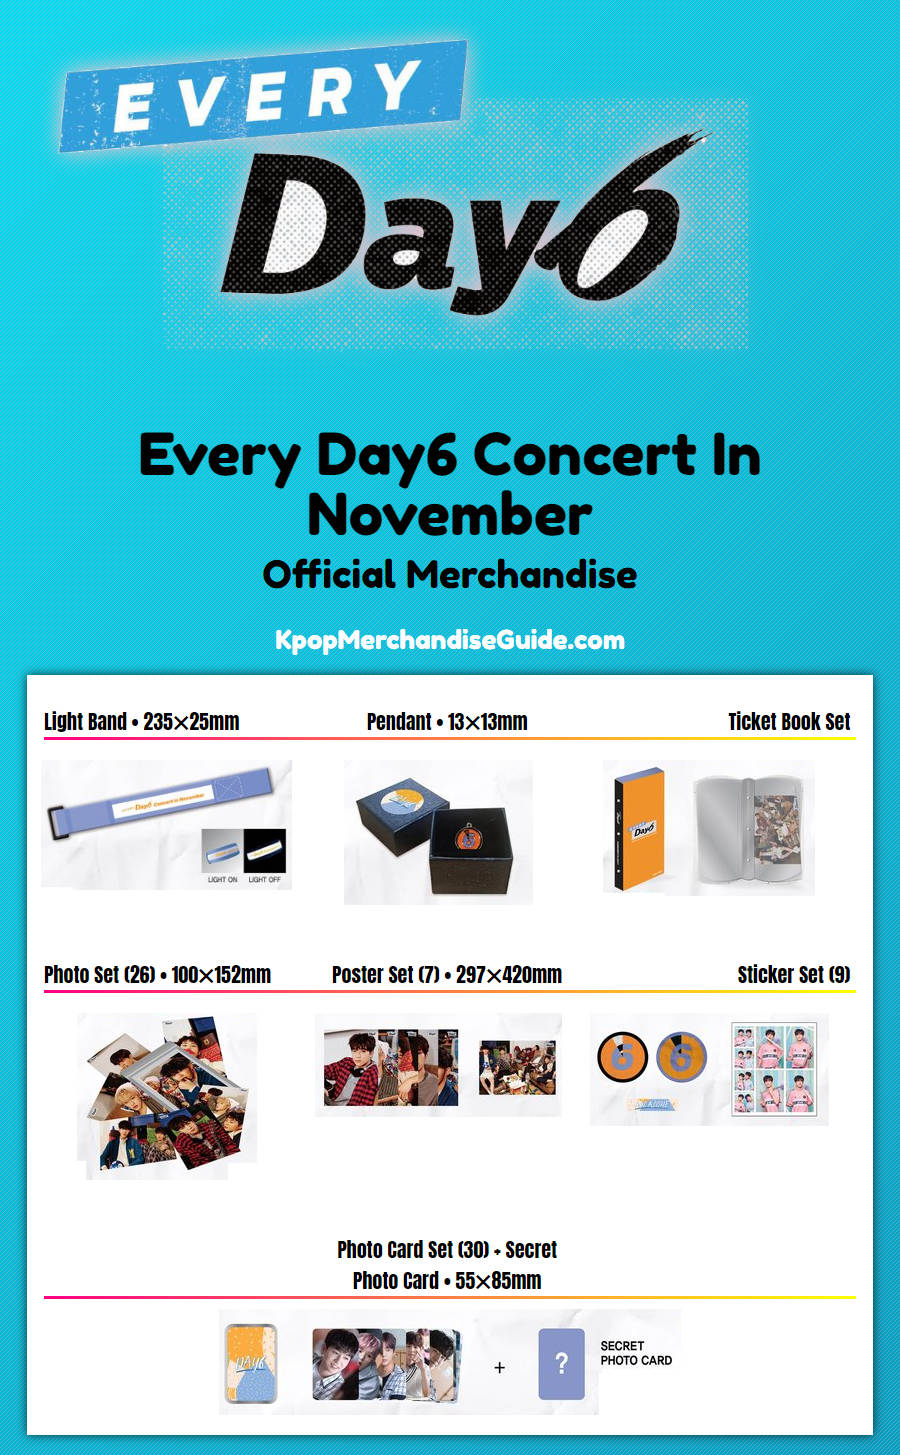 Every Day6 Concert In November Merchandise